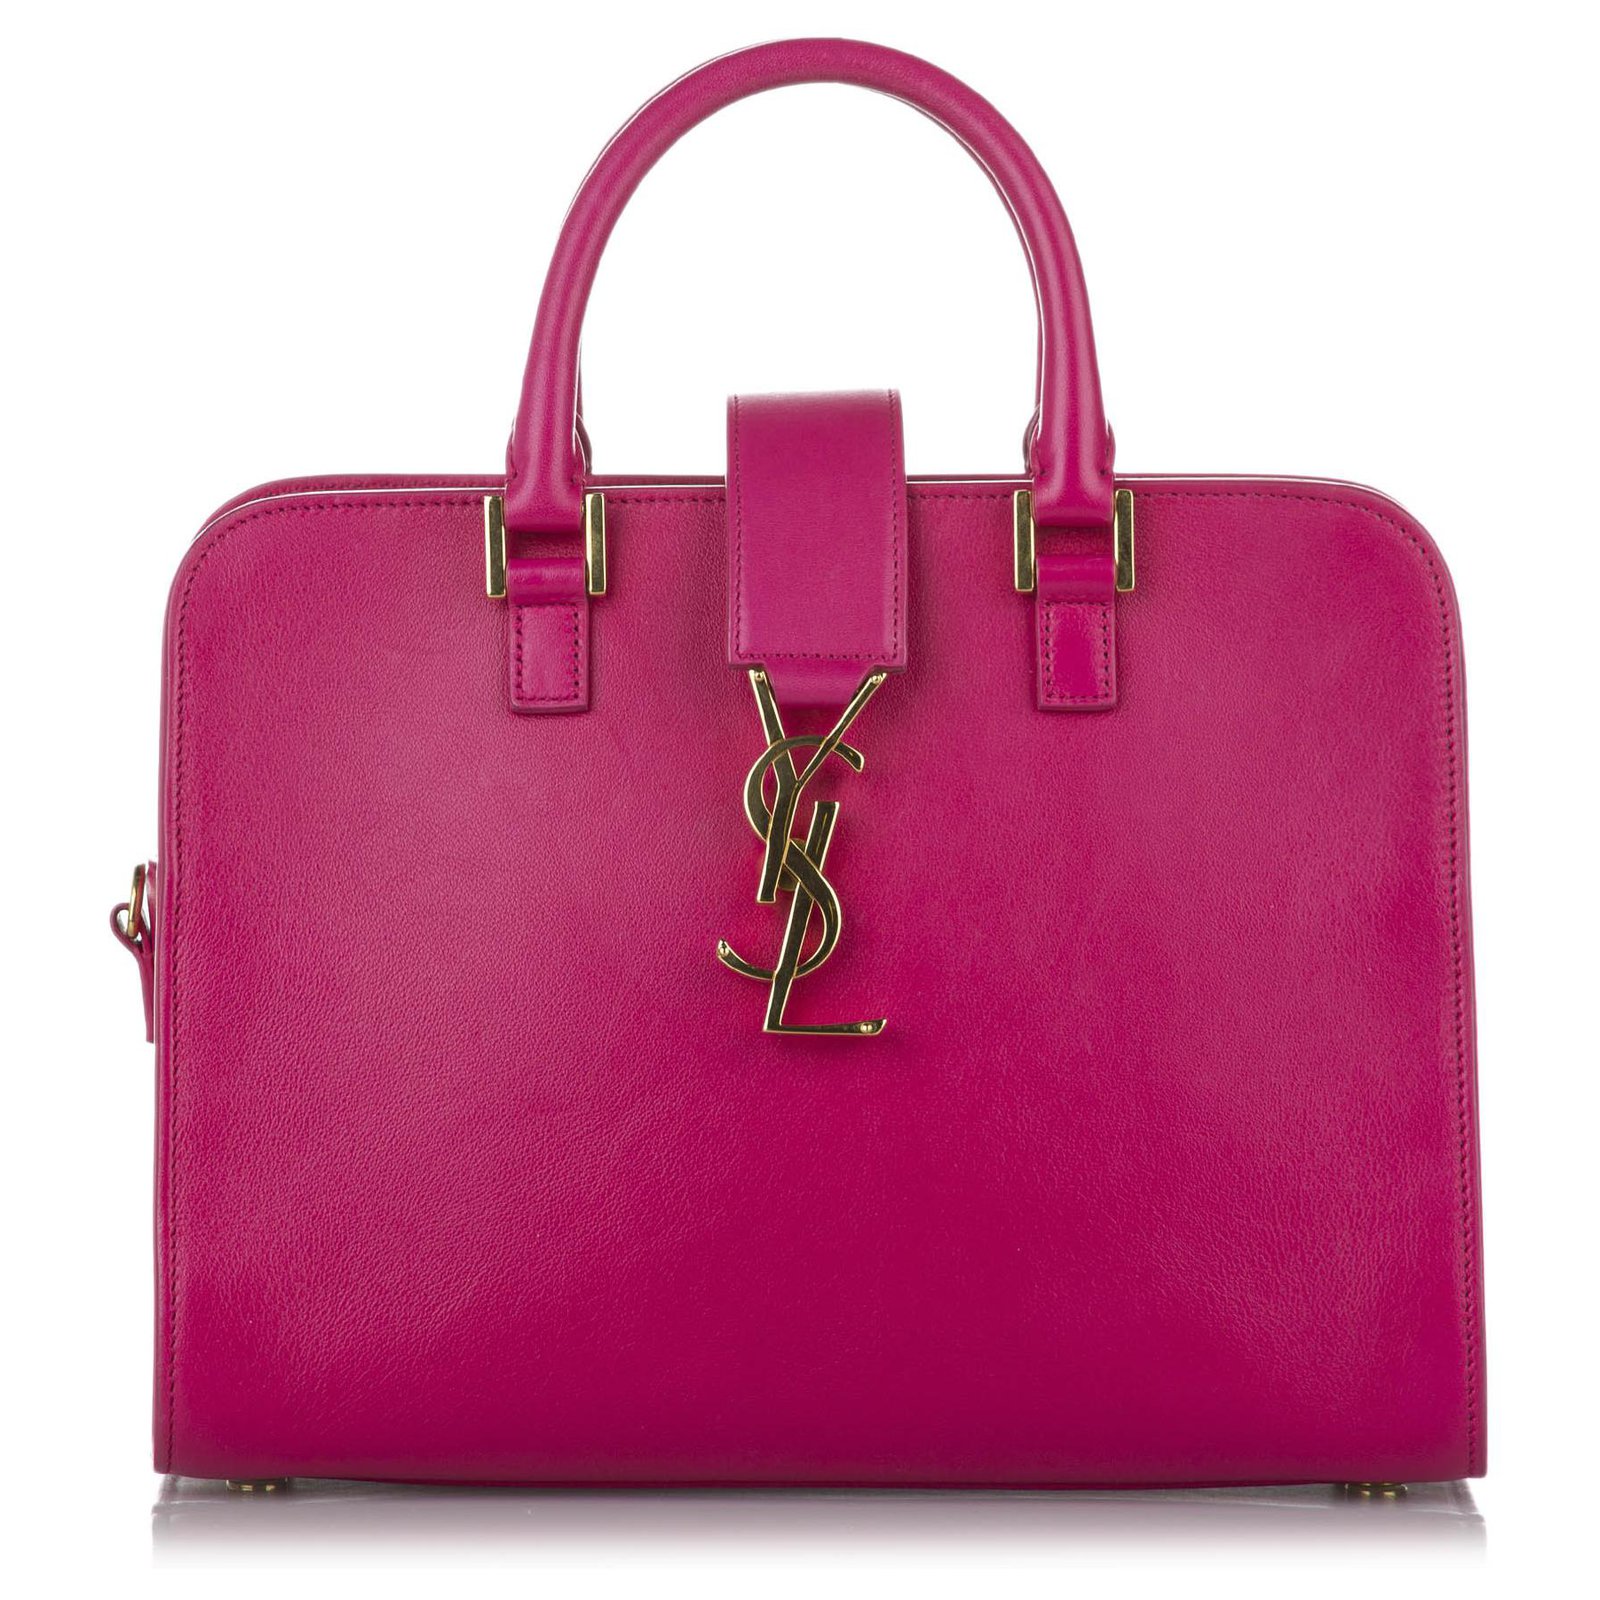 Yves Saint Laurent Cabas Bag Small in Pink